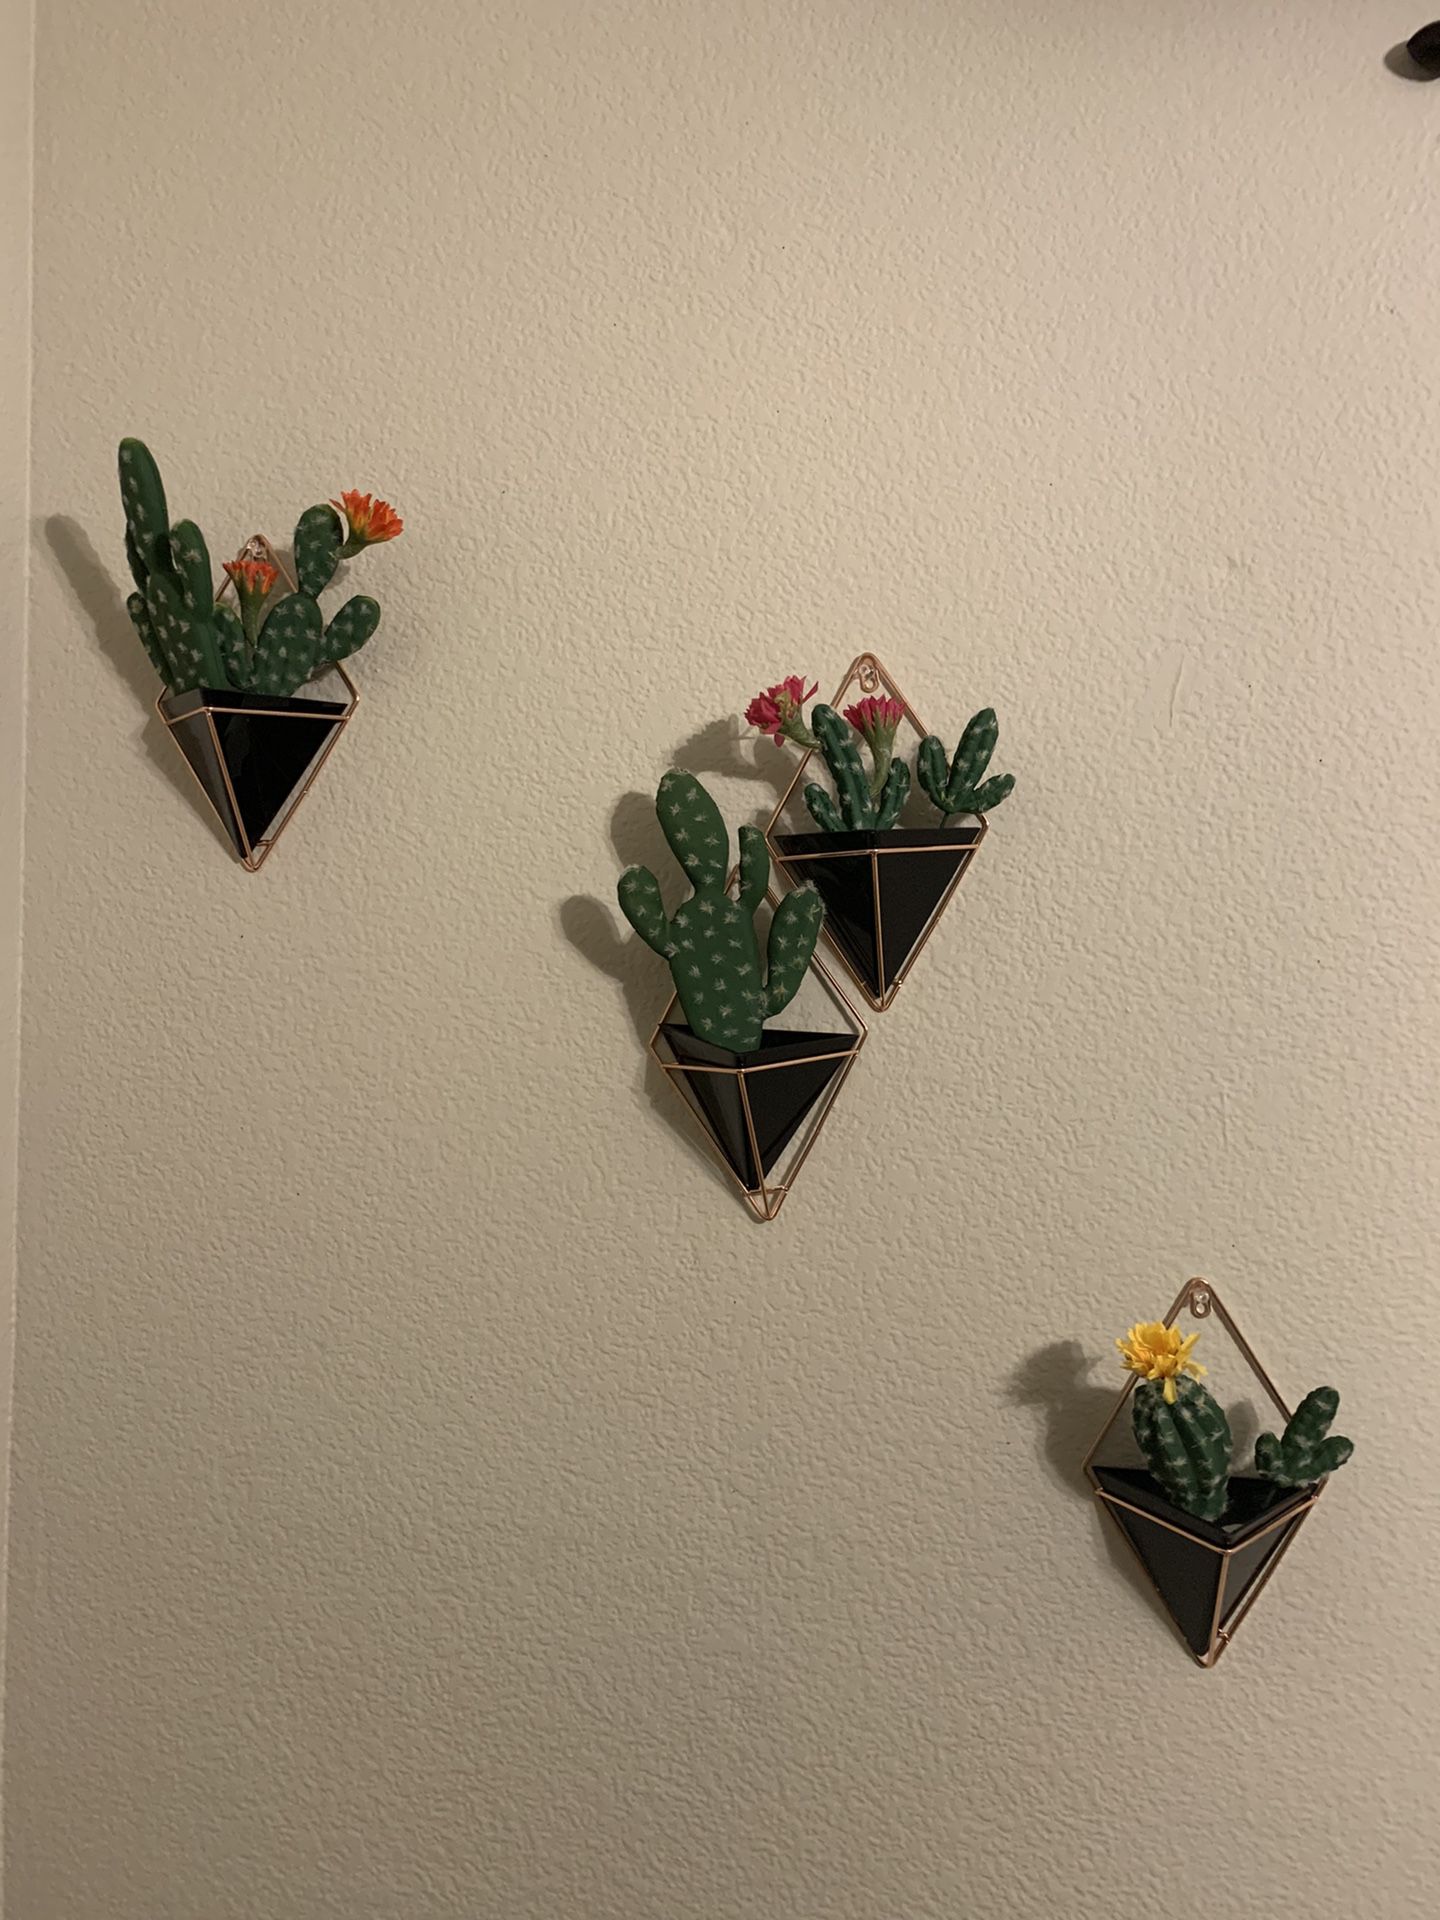 4 hanging pots with cactus 🌵